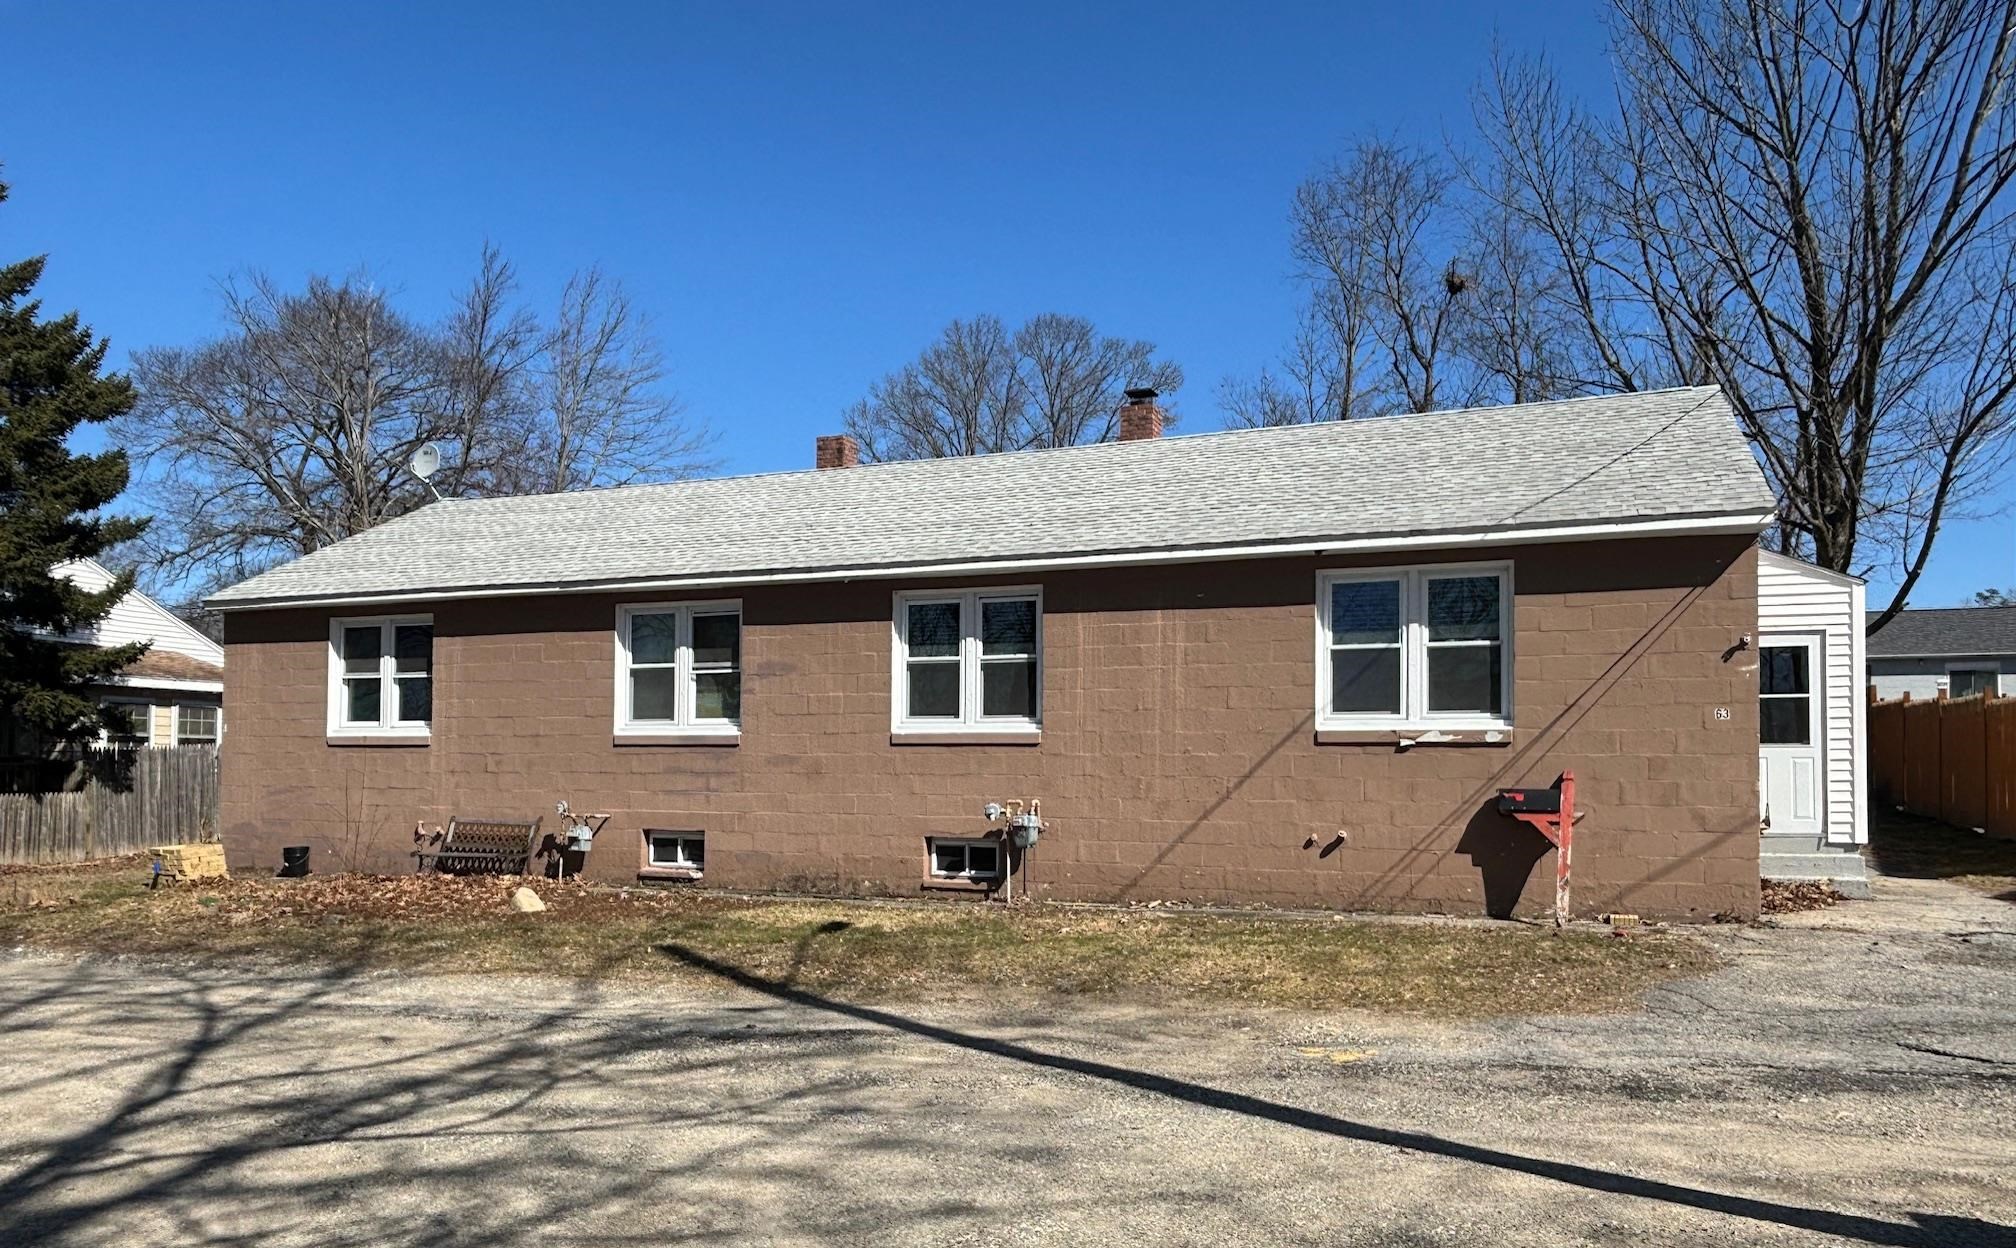 MANCHESTER NH Multi Family Homes for sale